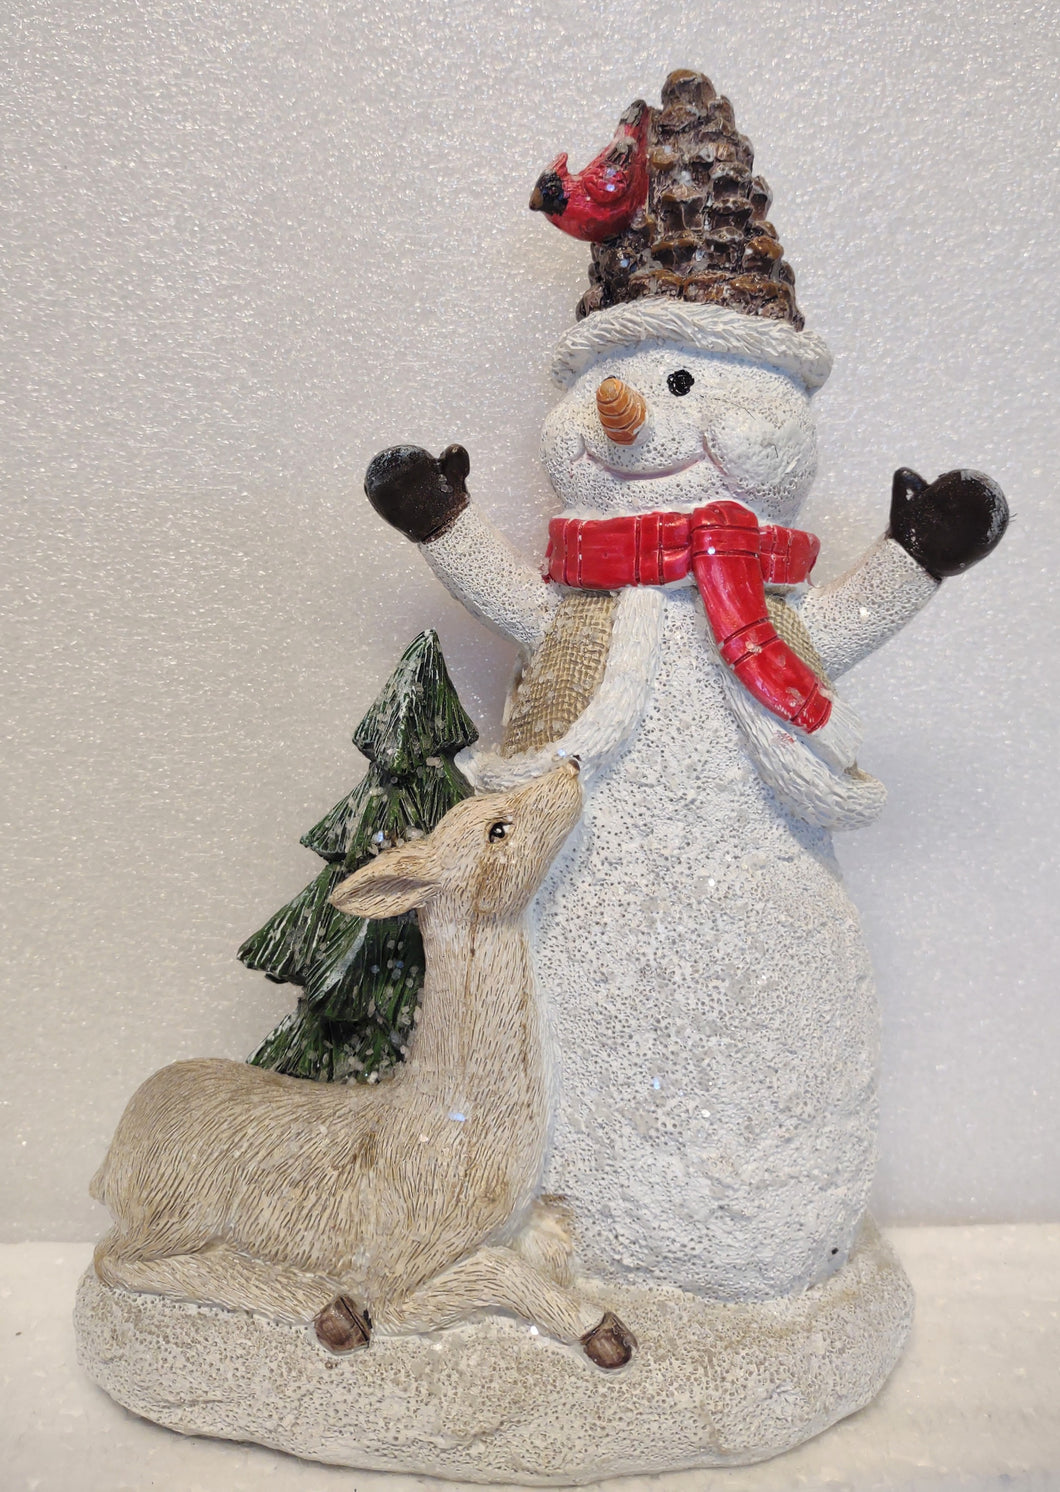 Snowman Wearing Red Scarf with Deer Laying Down By Christmas Tree Figurine